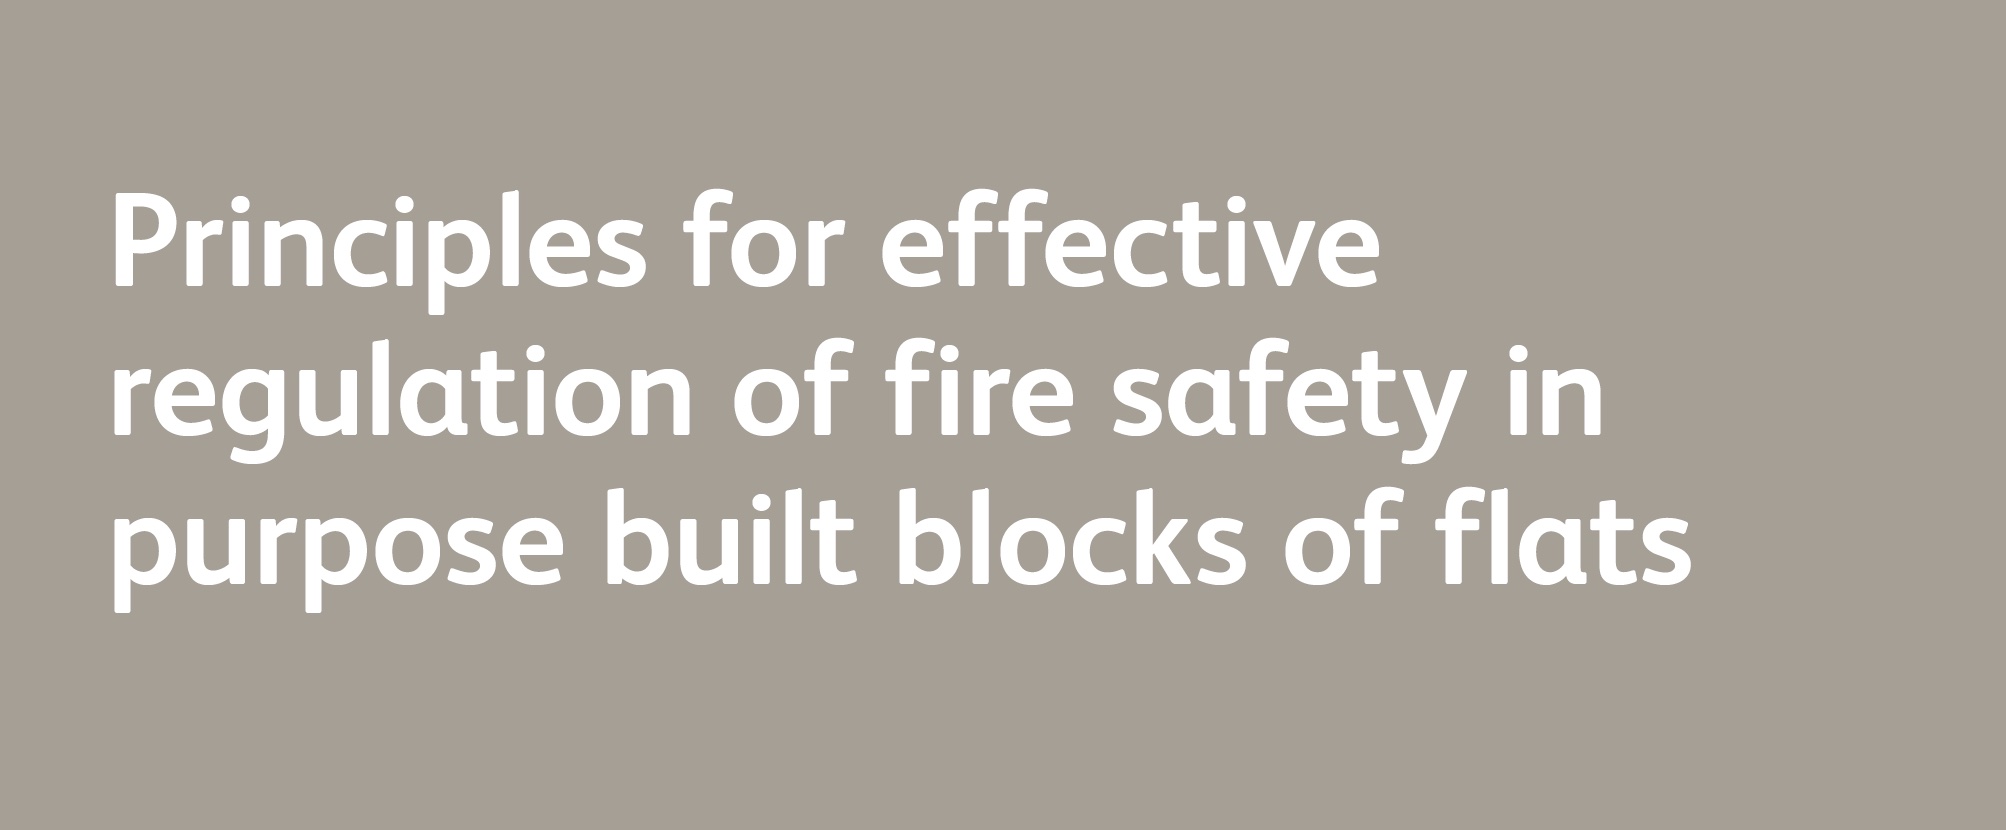 CIEH Principles of fire safety guidance